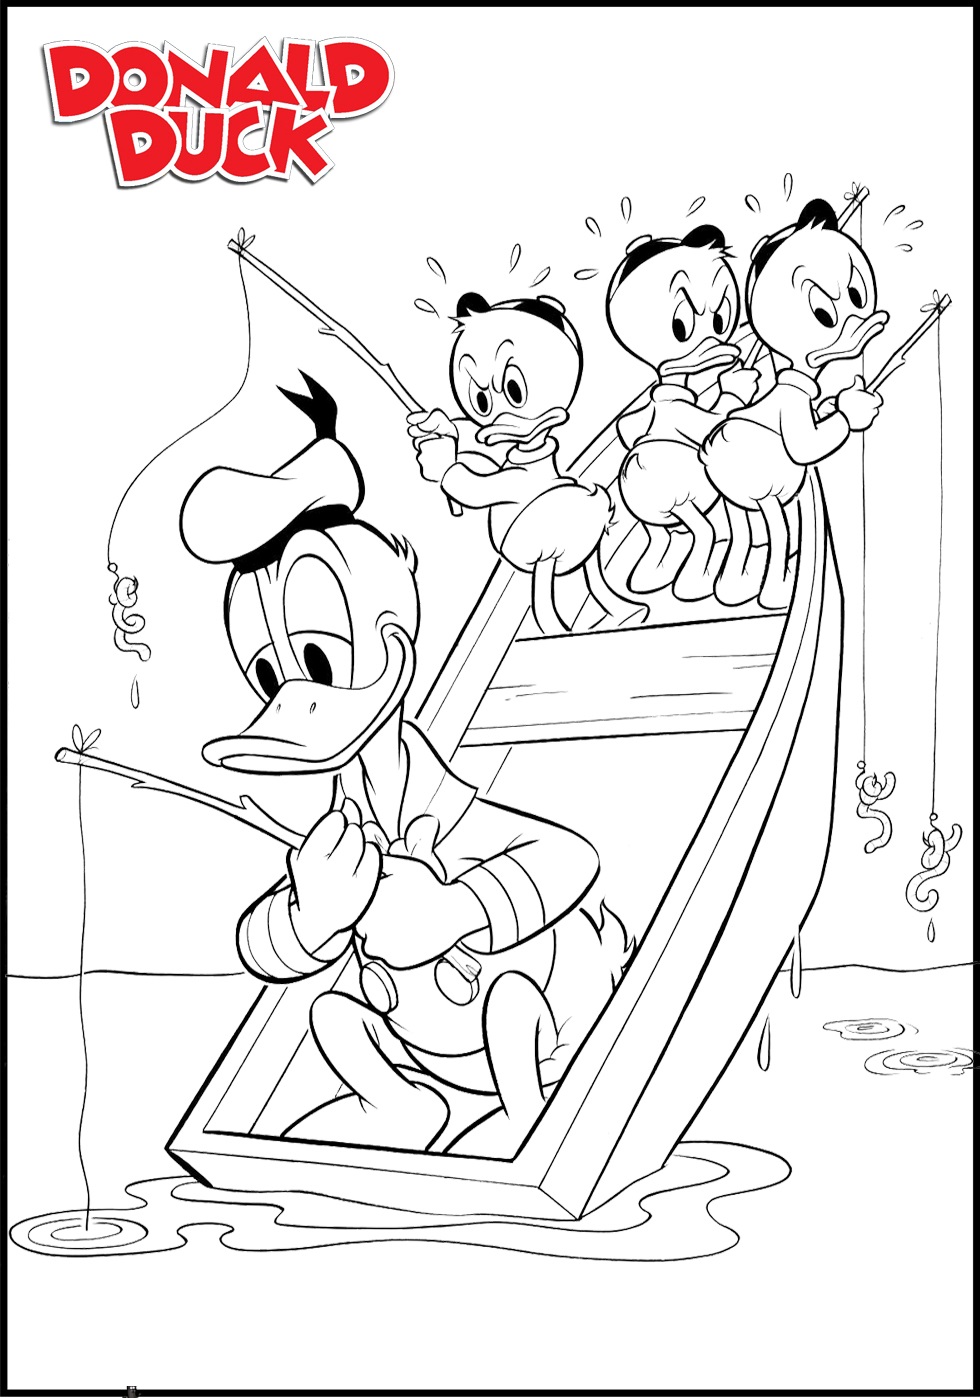 donald-duck-and-his-nephiews-fishing-coloring-pages-02